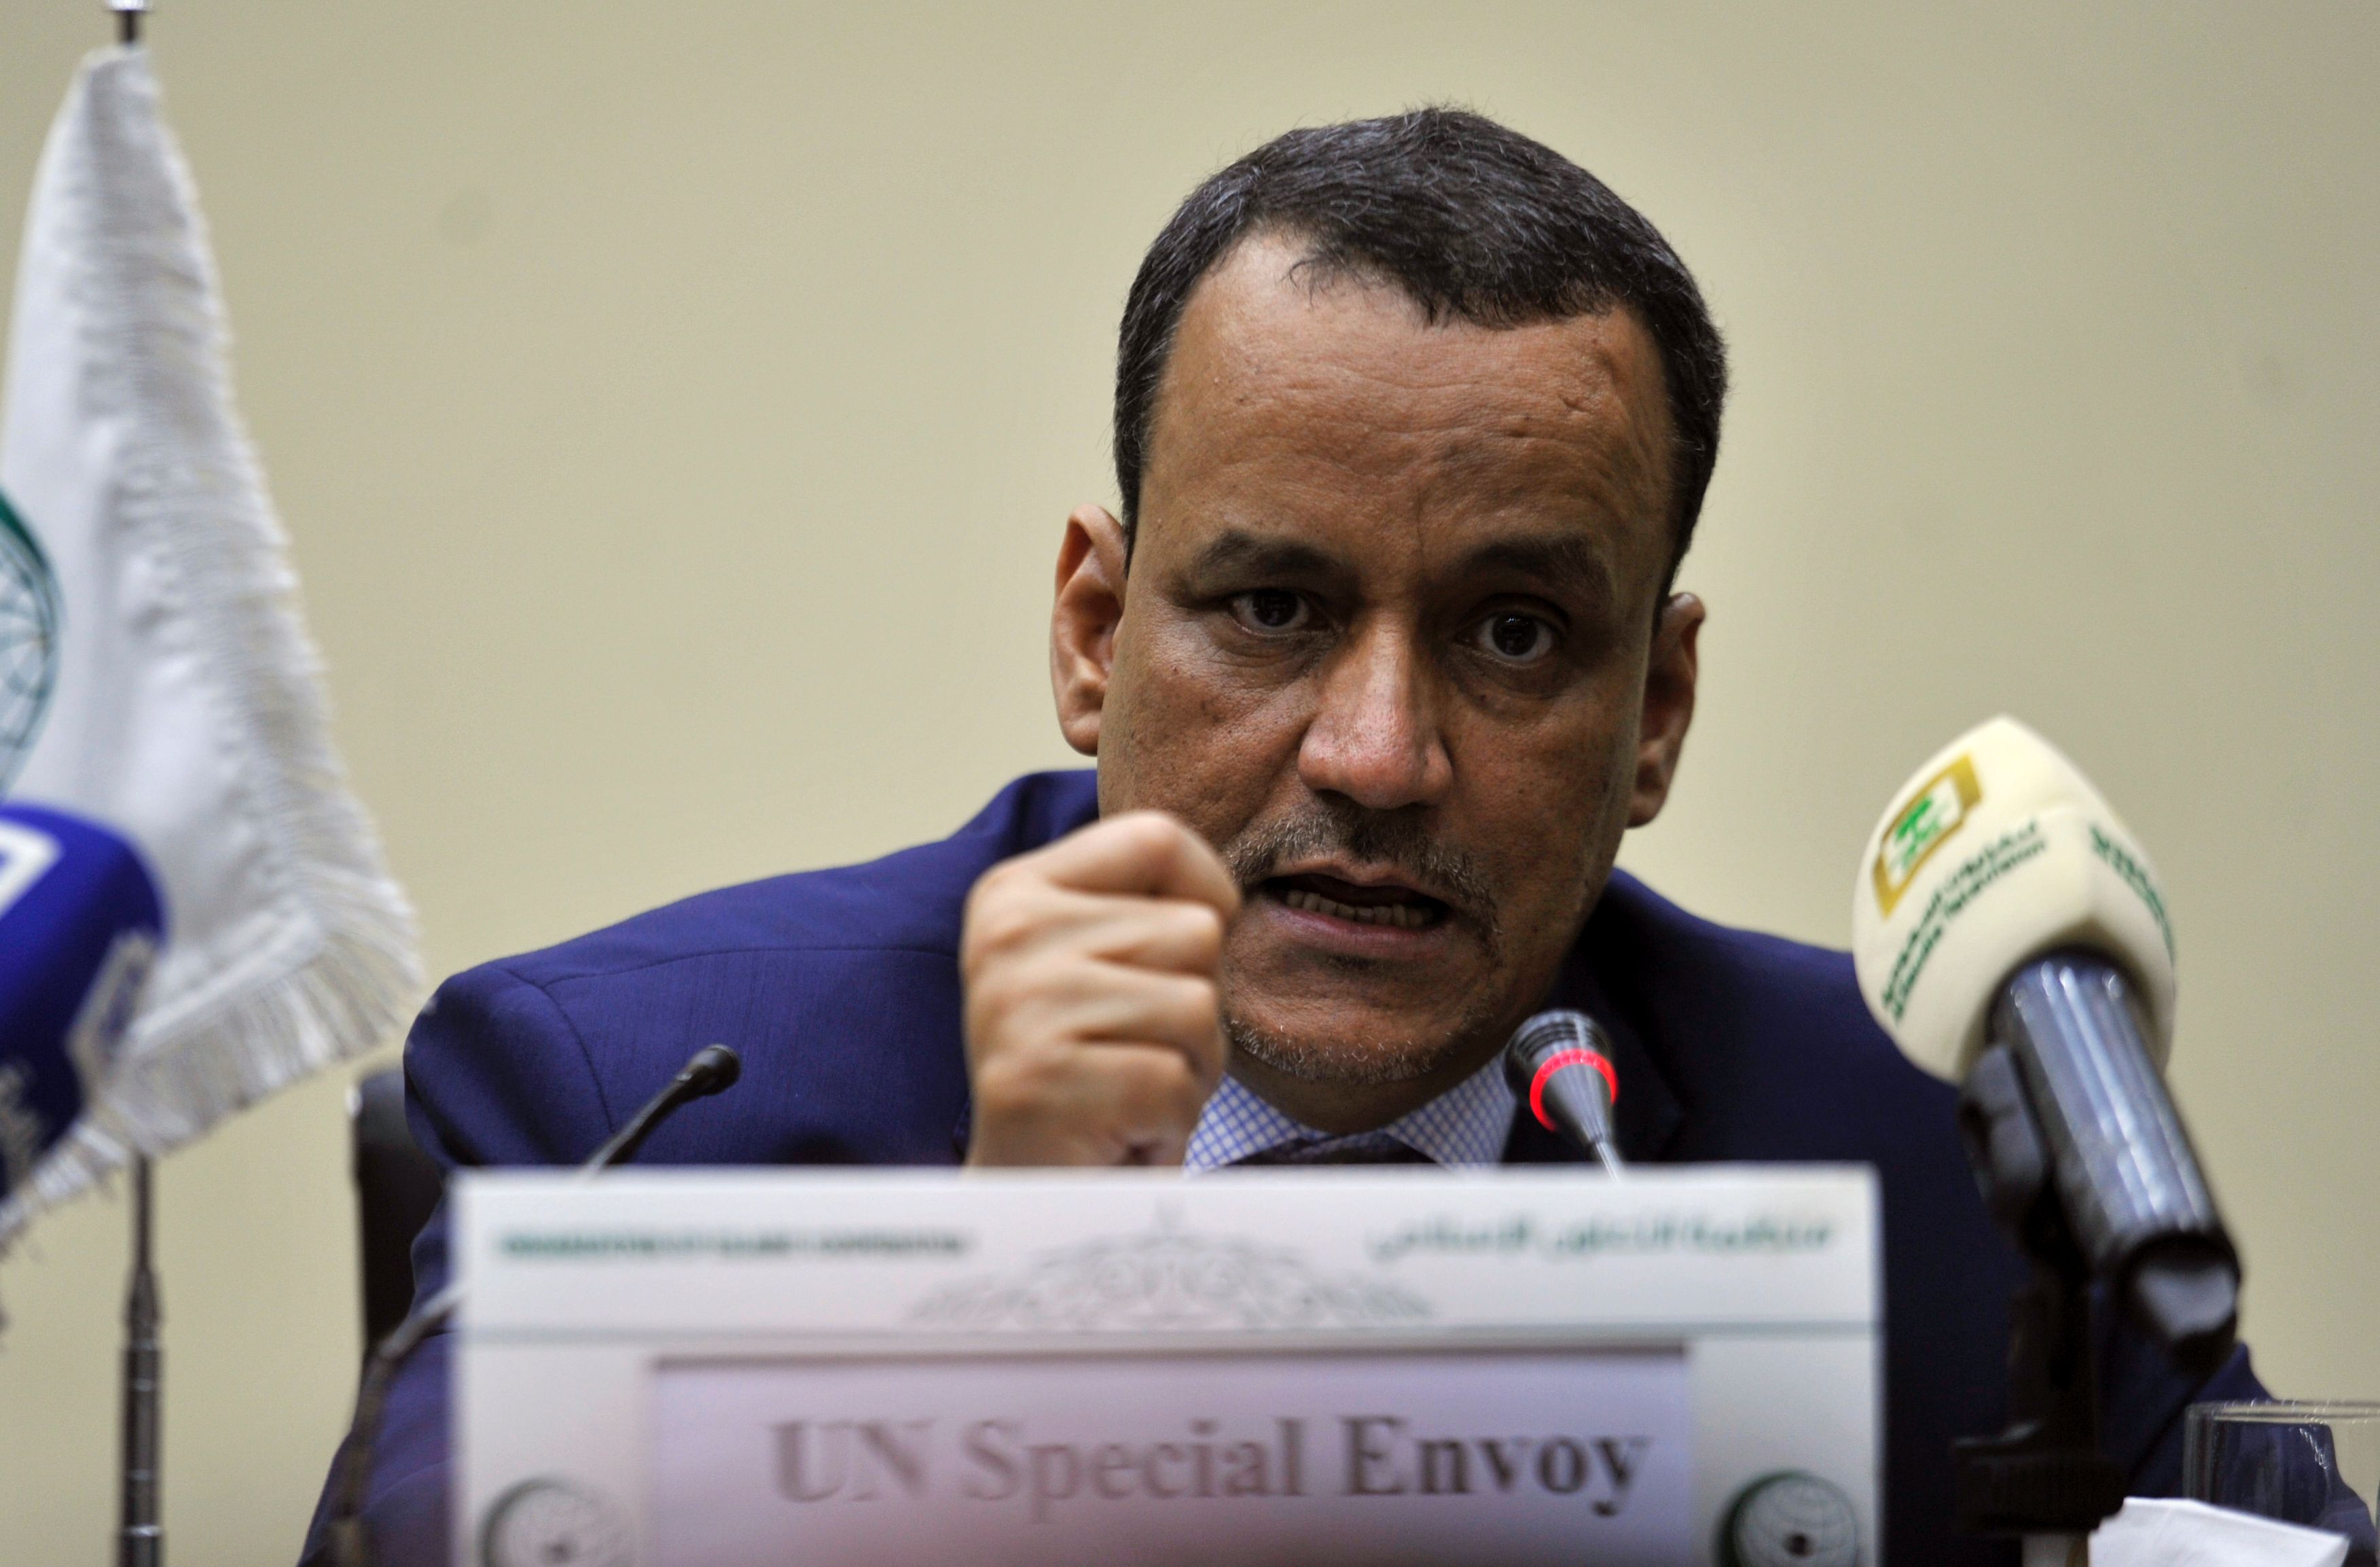 United Nations Special Envoy for Yemen Ismail Ould Cheikh Ahmed speaks during a press conference with the secretary general of the Organization of Islamic Cooperation (OIC) in Jeddah on August 8, 2016. (AFP/Getty Images)